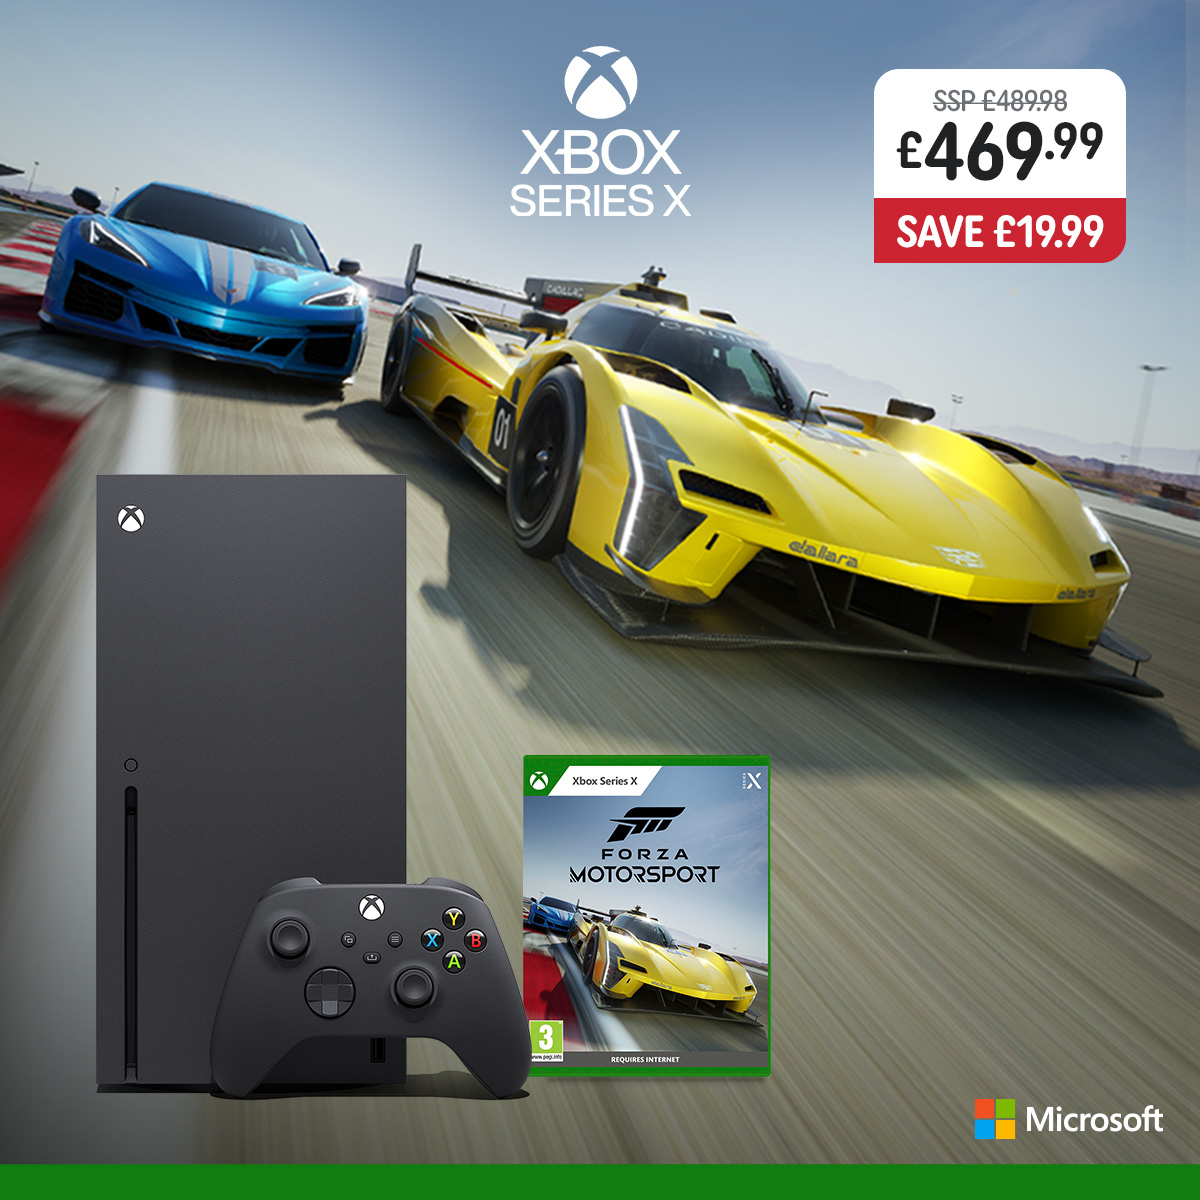 SAVE £19.99 on the Xbox Series X Console & Forza Motorsport Bundle! 🎮 ONLY £469.99! ✅ Offer is valid from April 5th-18th, while stocks last. Shop now at Smyths Toys 👉 tinyurl.com/256bbyy8